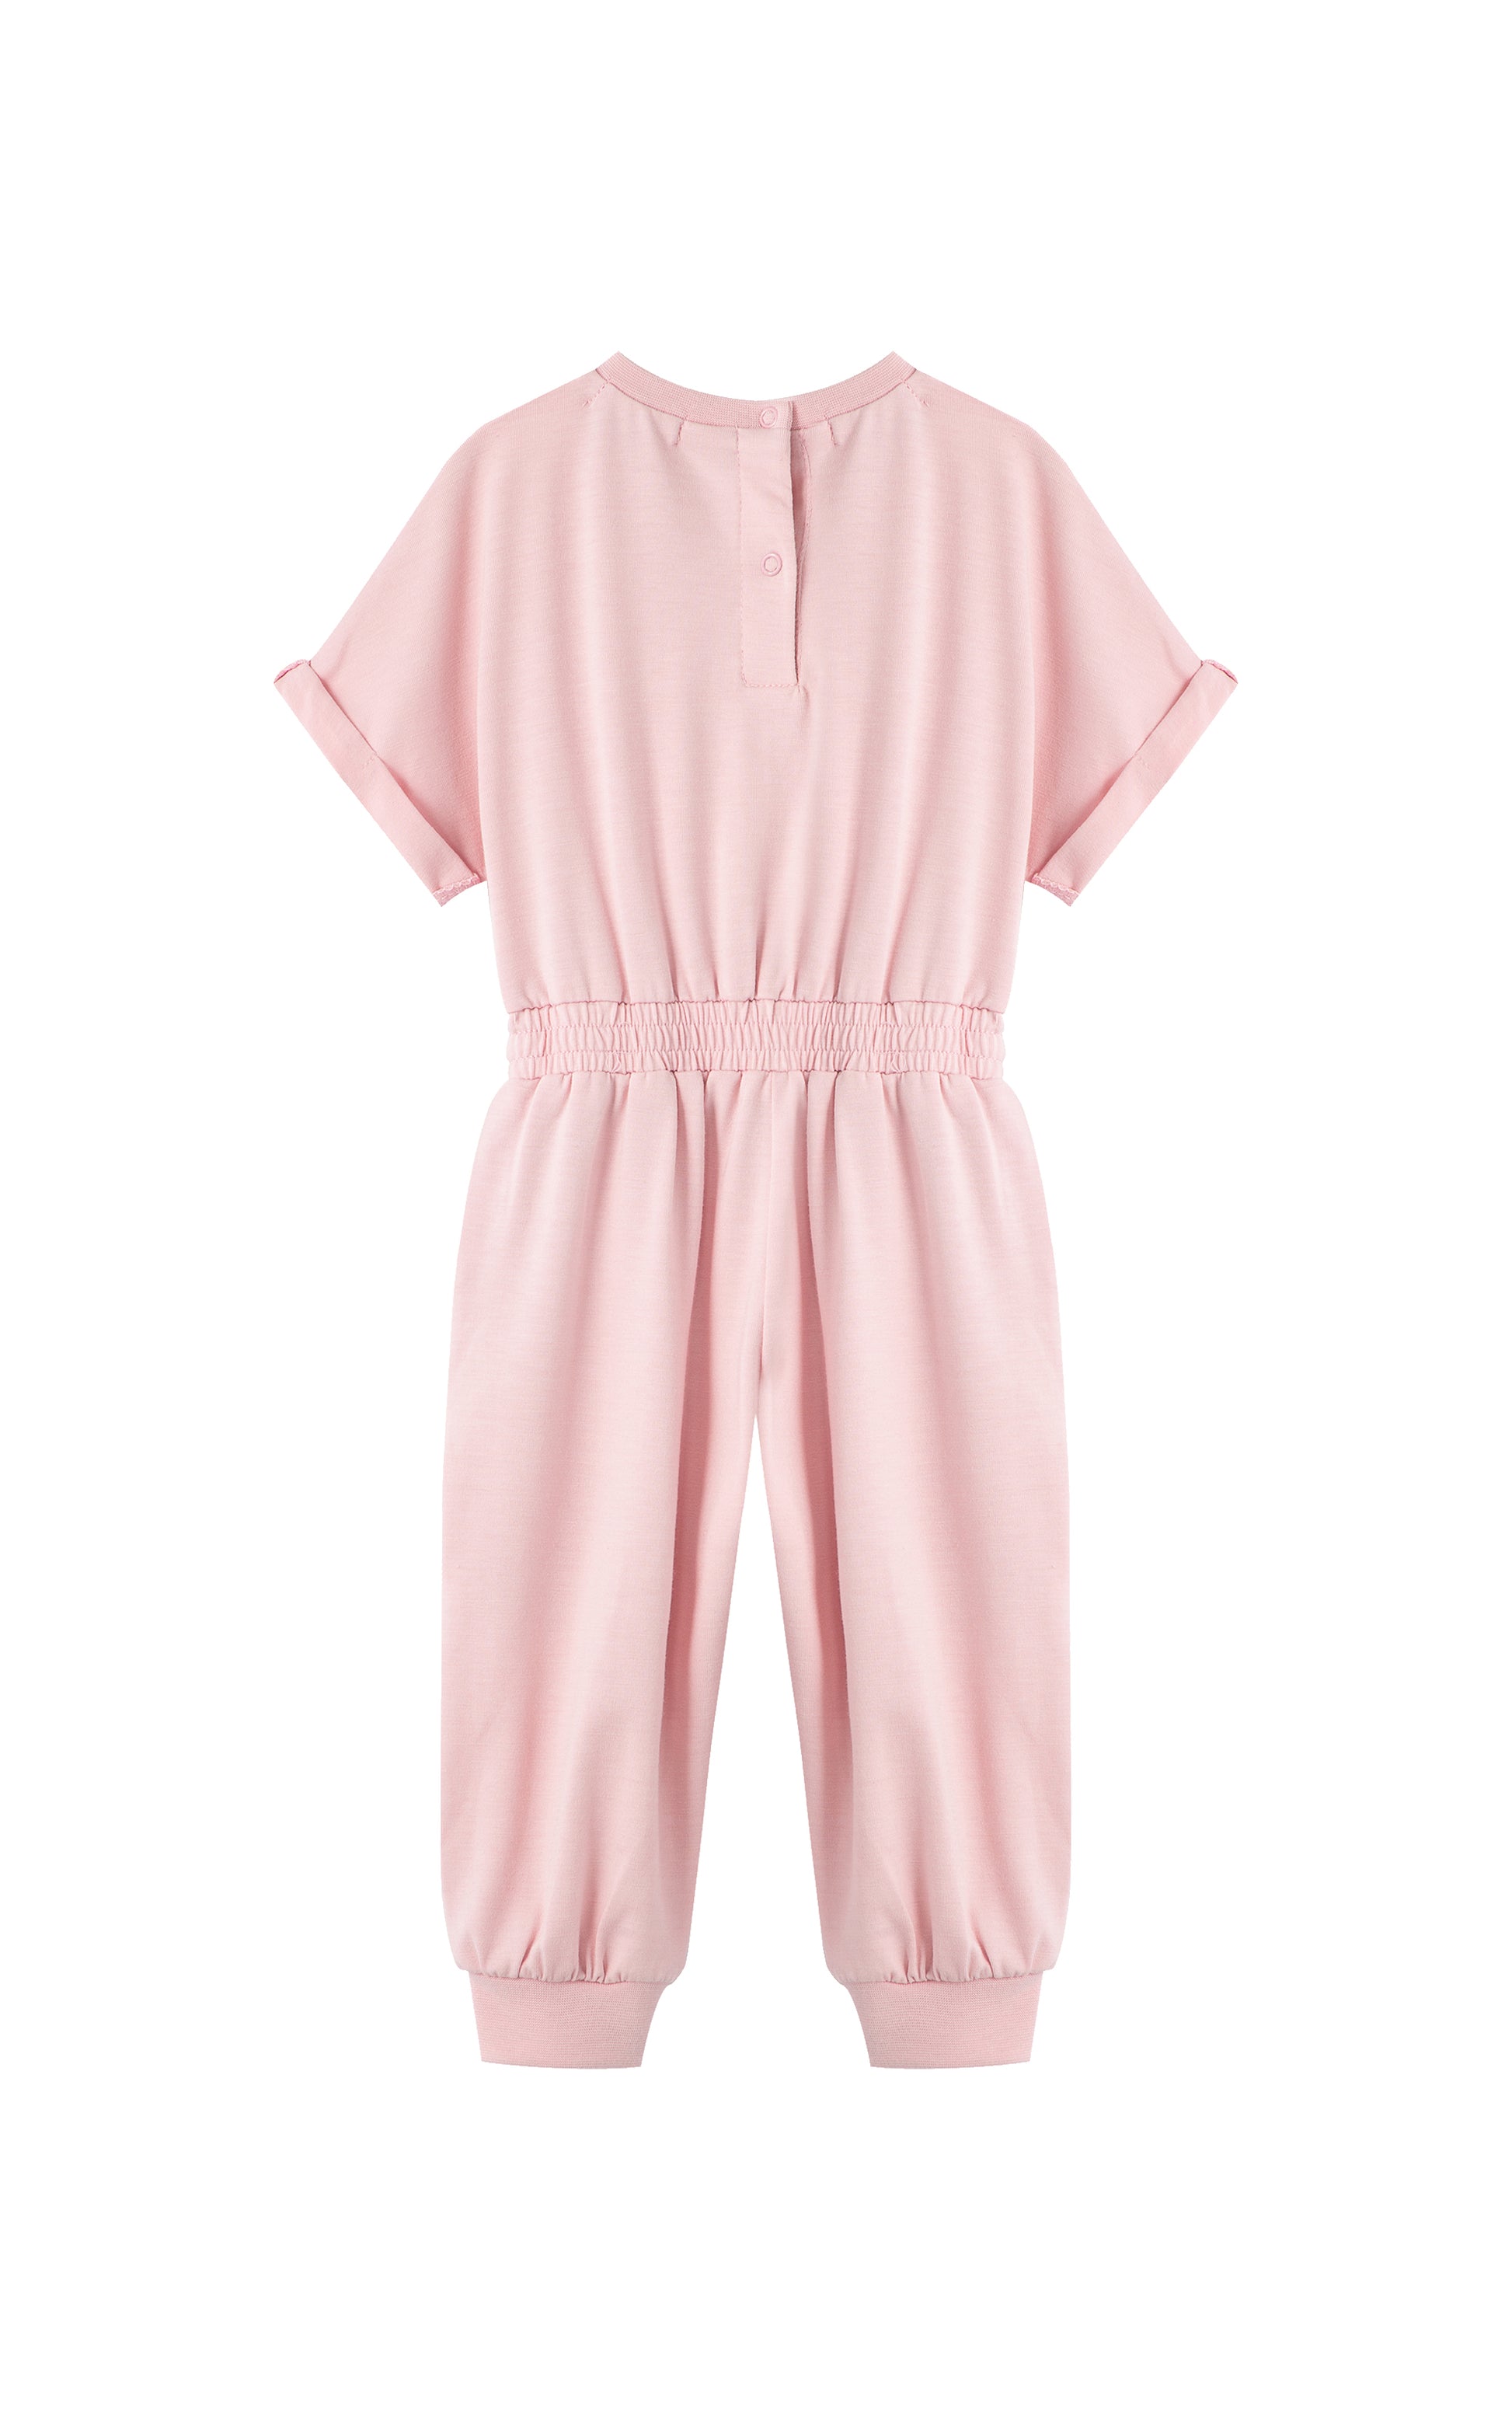 Back view of pink romper with folded cuff sleeves.